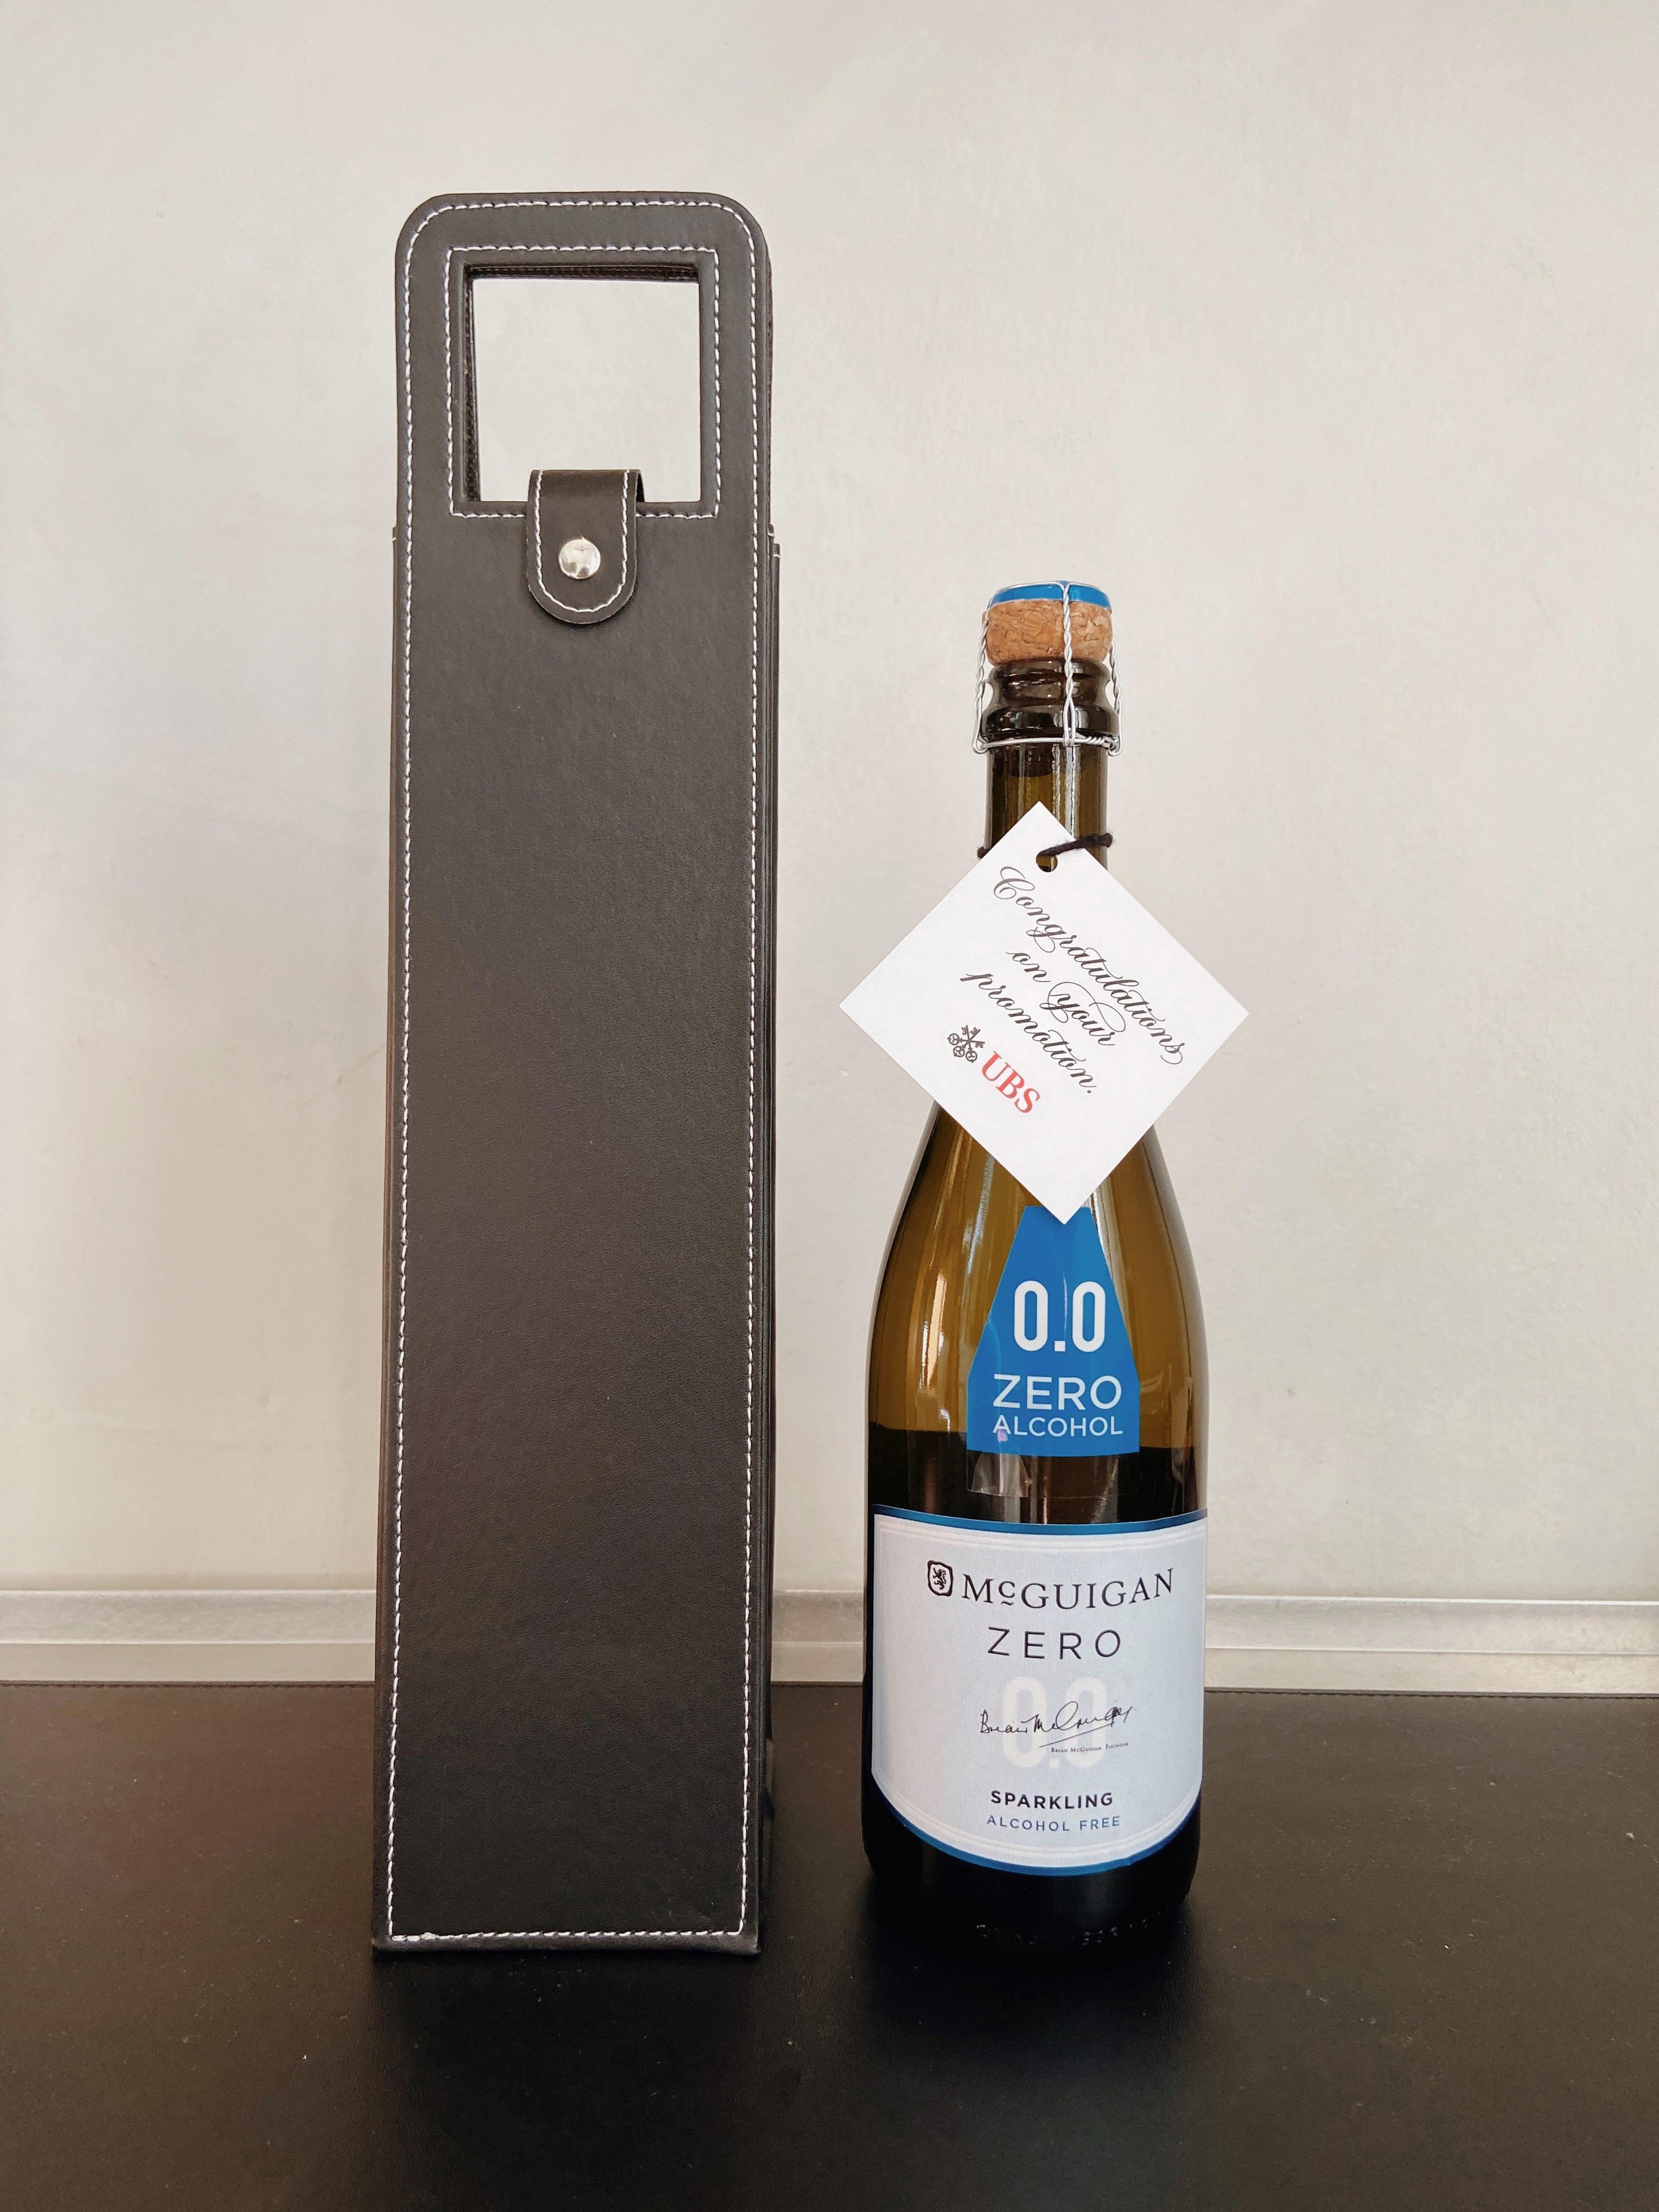 UBS AG | 287 Non-Alcoholic Sparkling Wine Gift Sets with Printed Notecards & Carriers